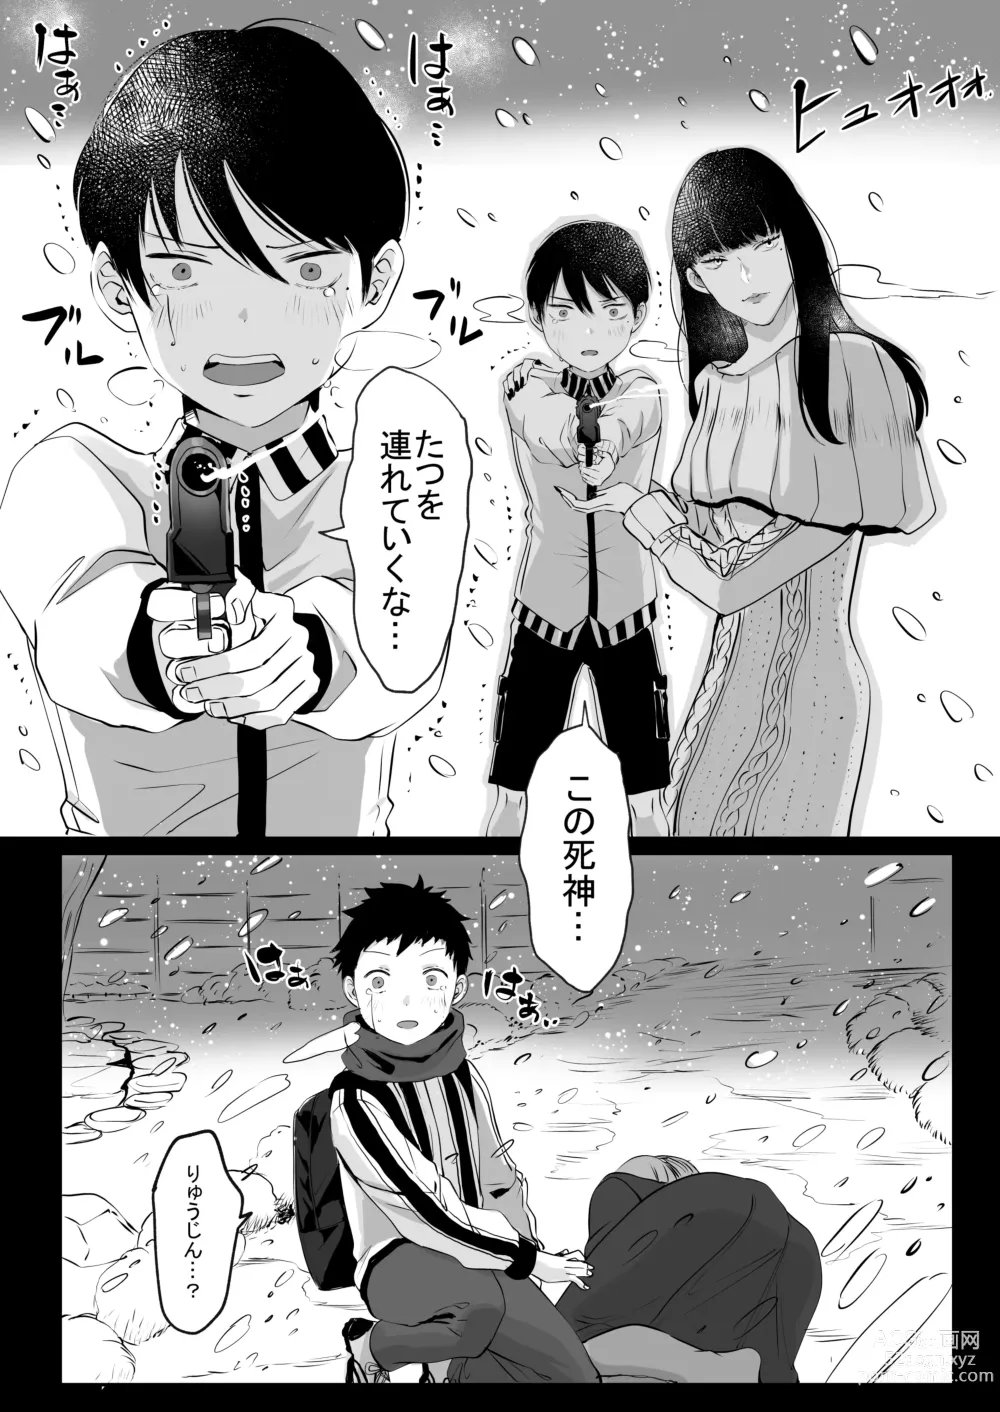 Page 10 of doujinshi Im crazy for you.